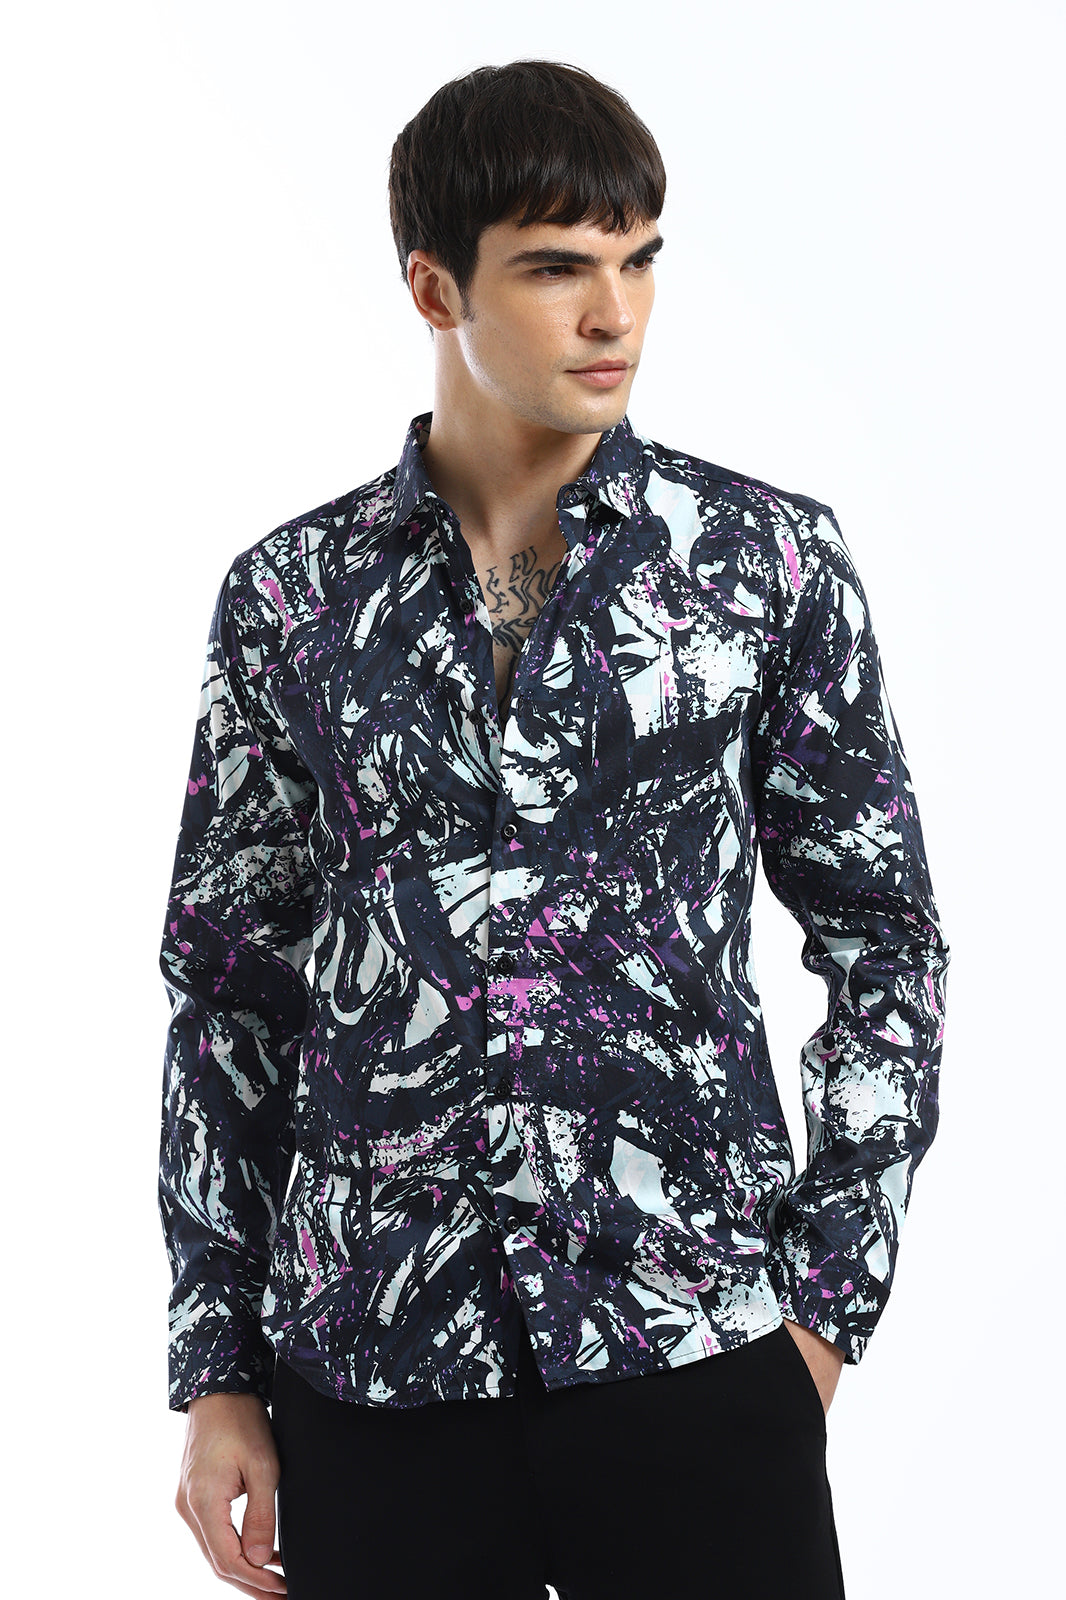 Contempory Marble Printed Shirt